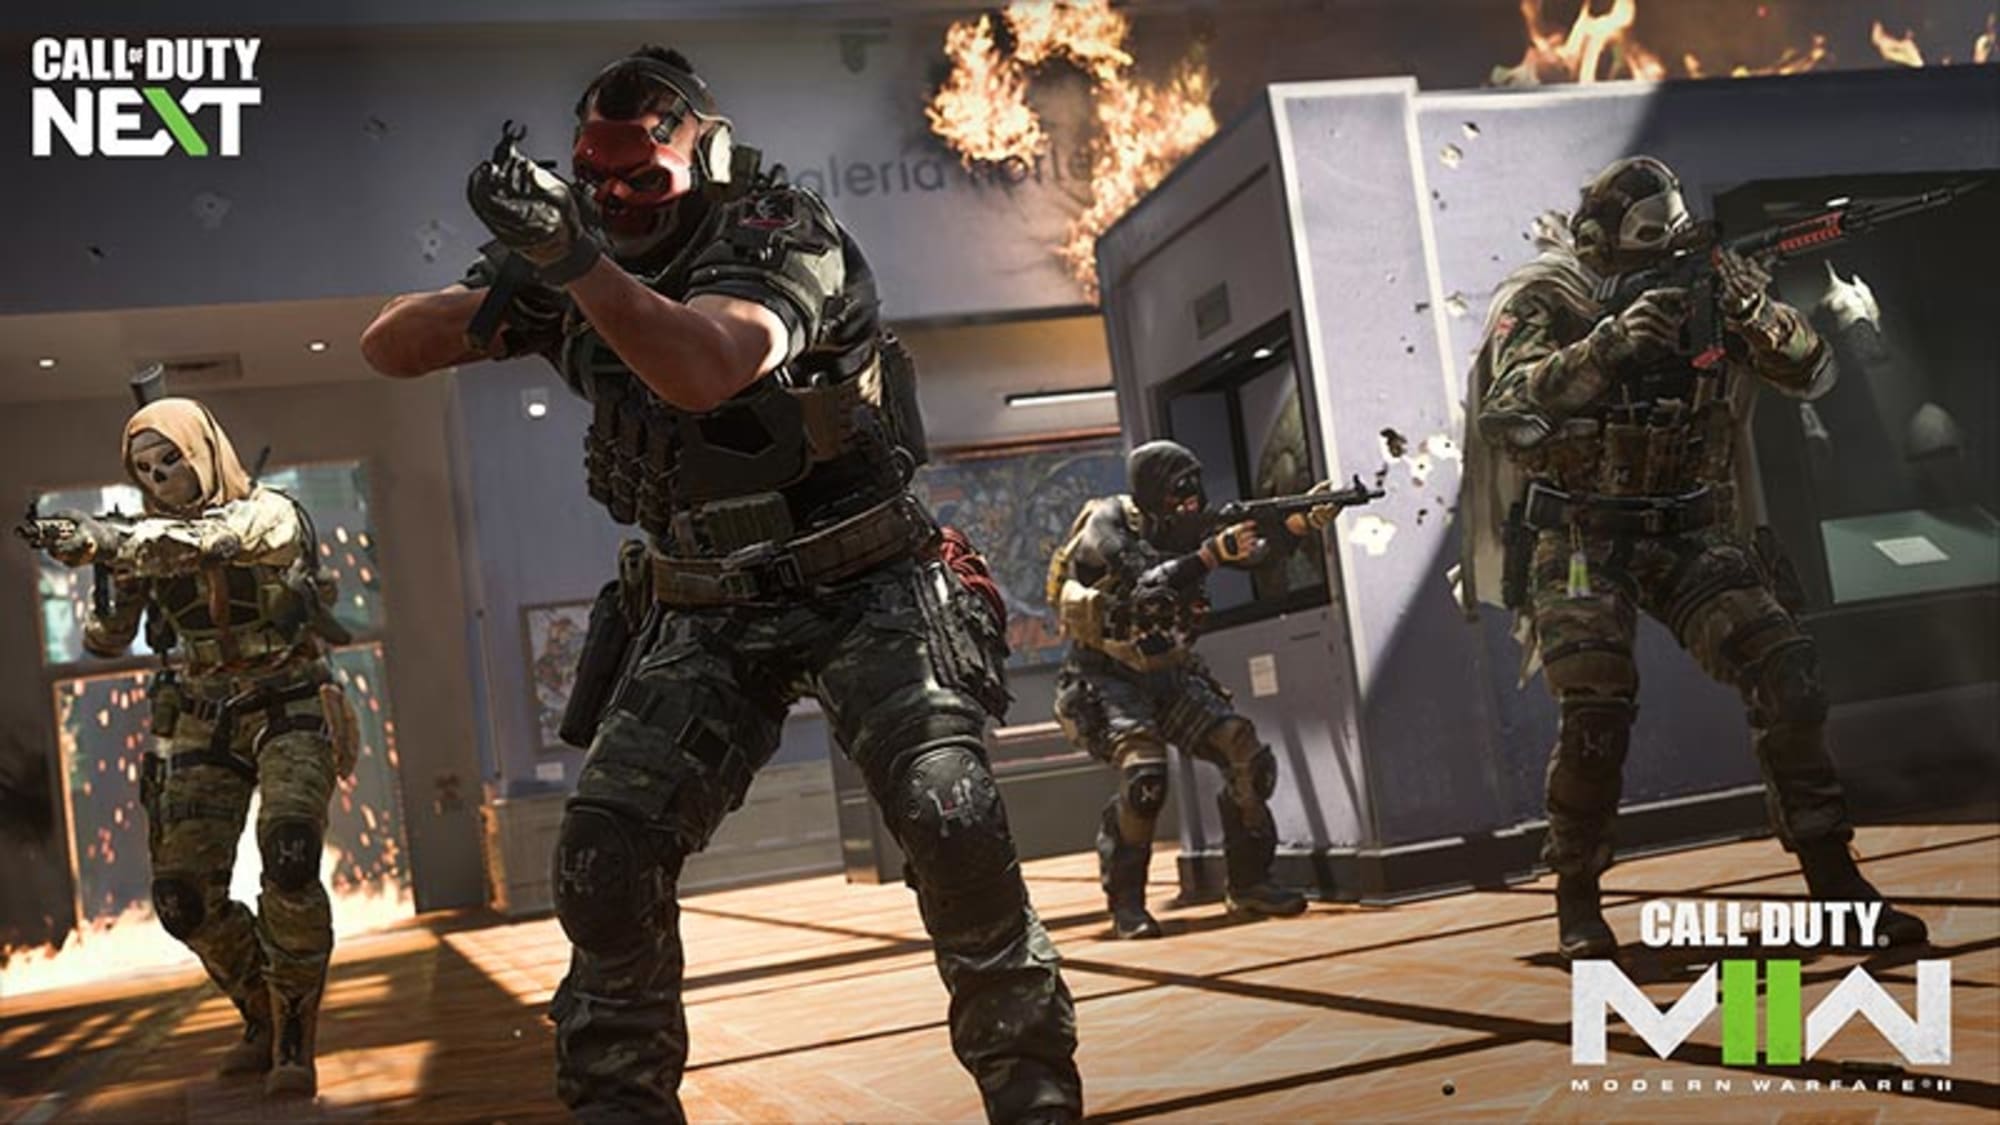 Call of Duty: Modern Warfare 2 Beta first impressions: The good and the bad